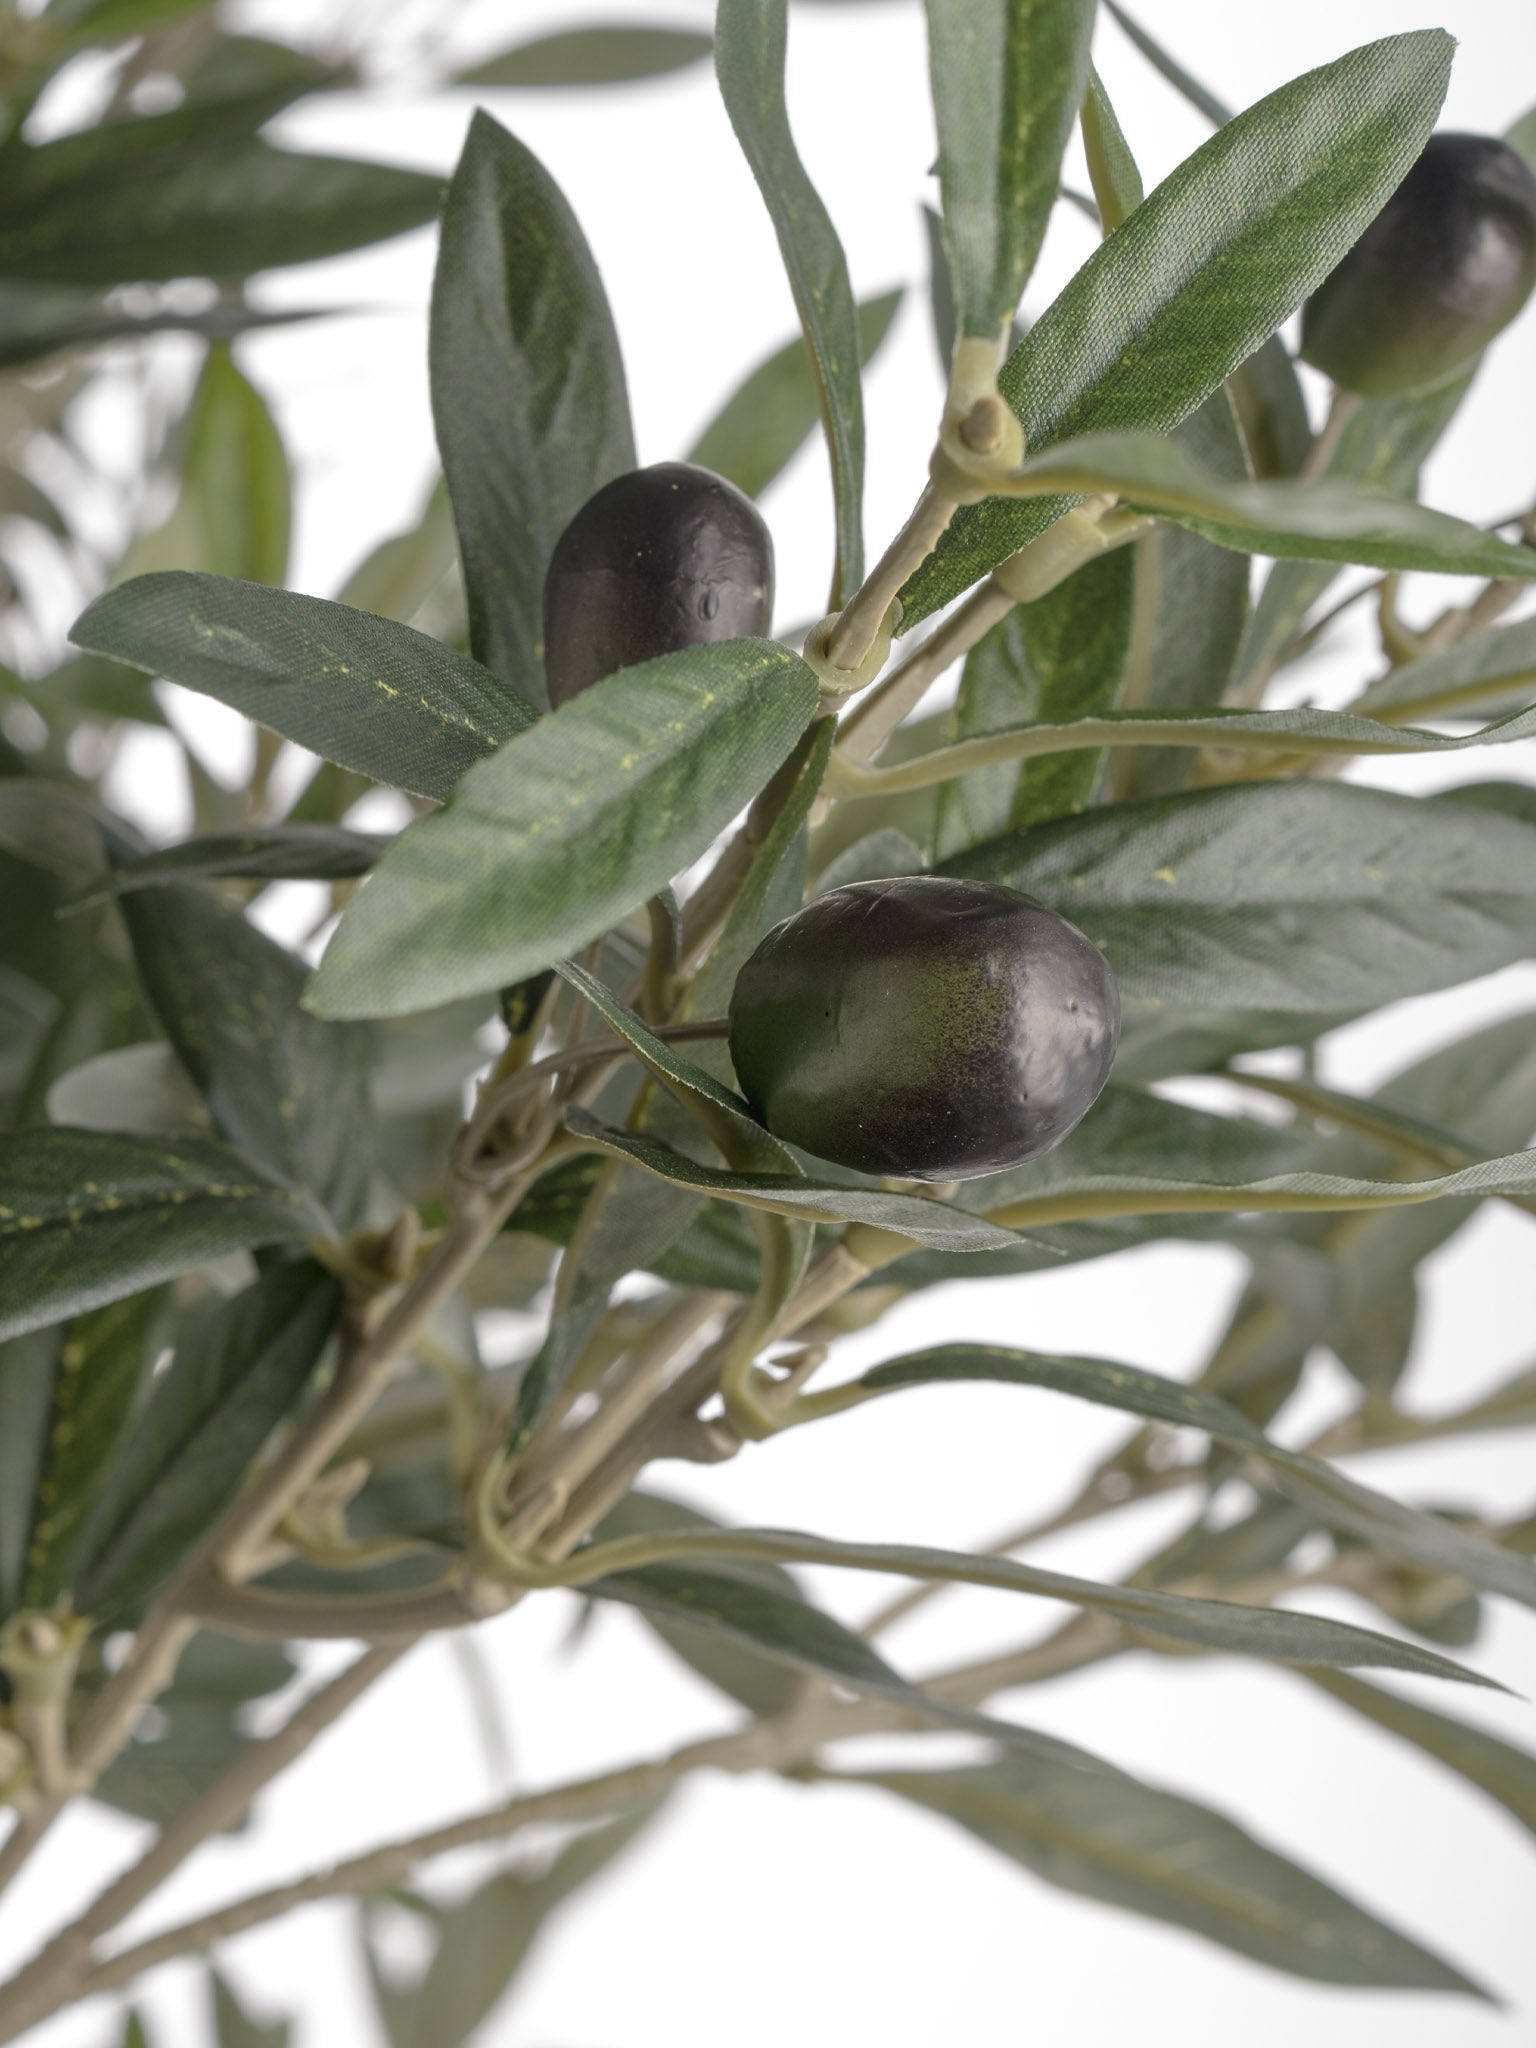 Large Faux Olive Tree